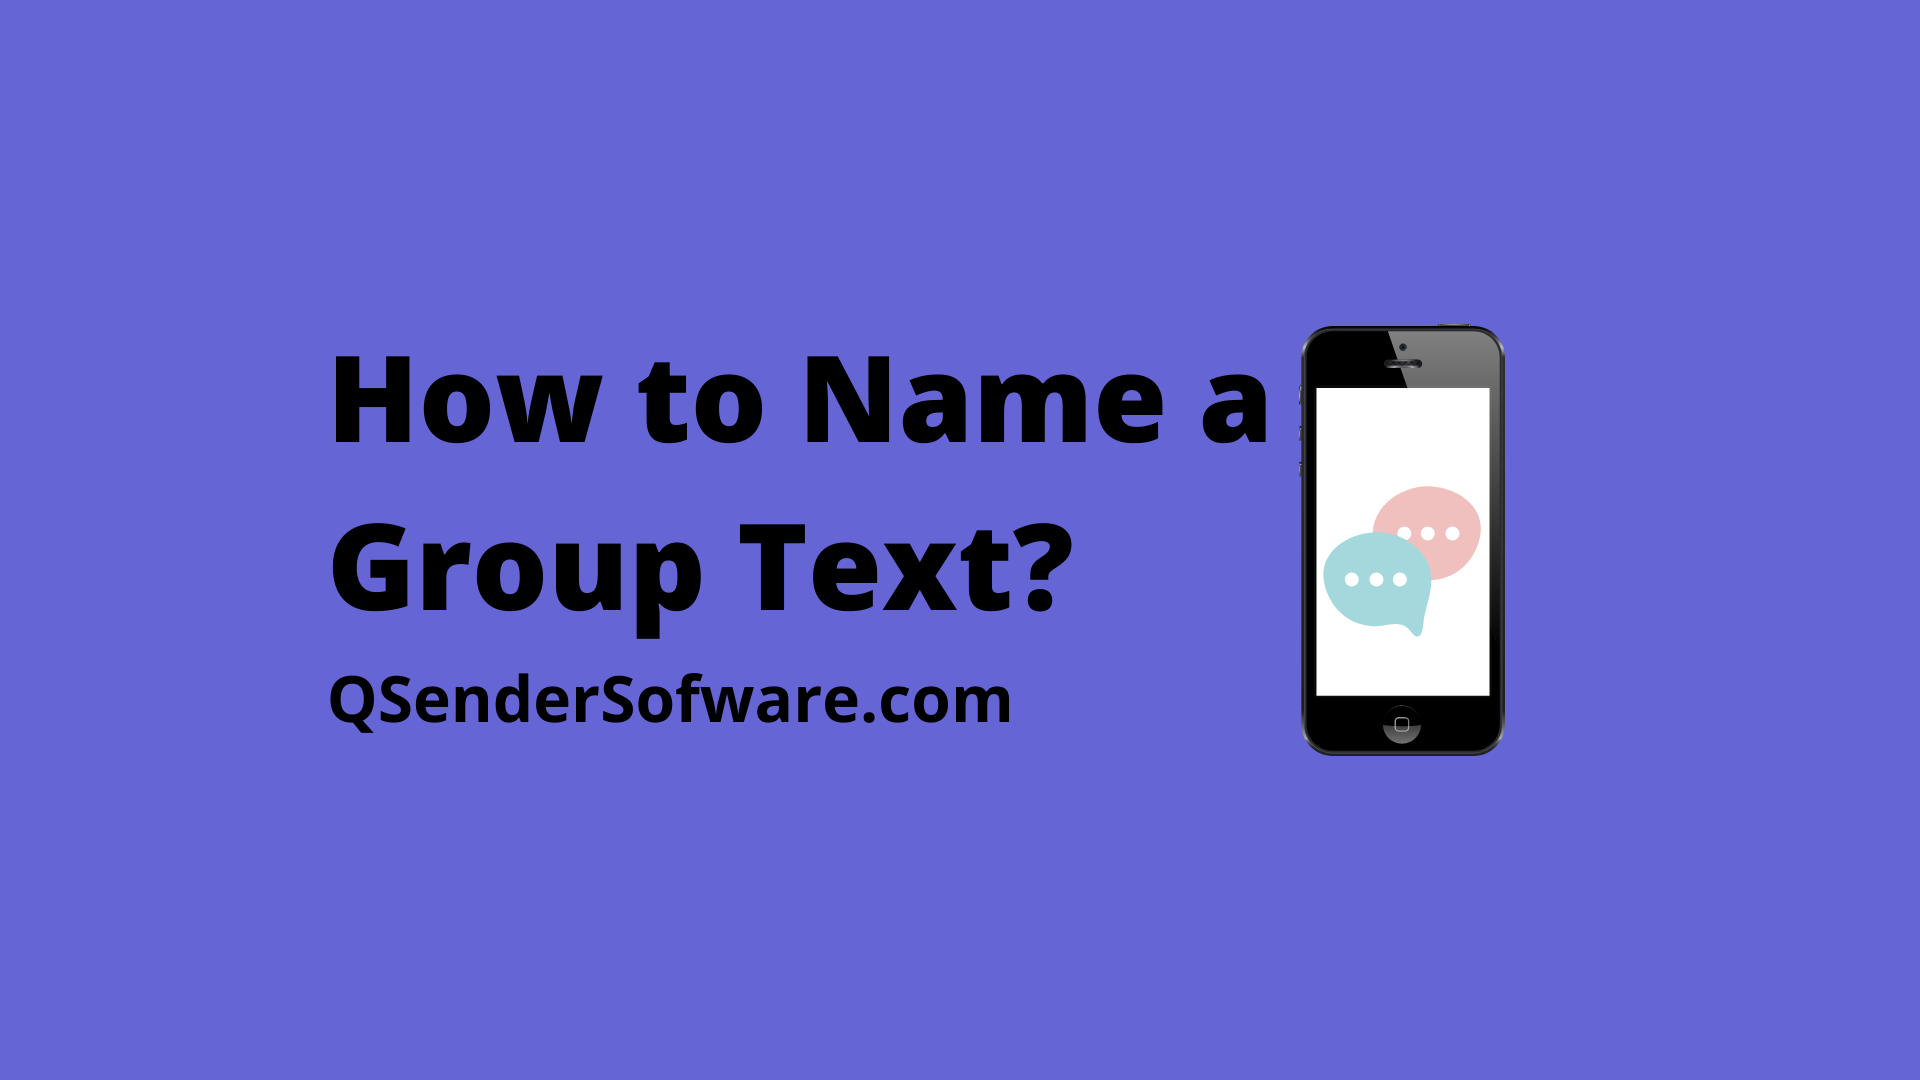 How to Name a Group Text